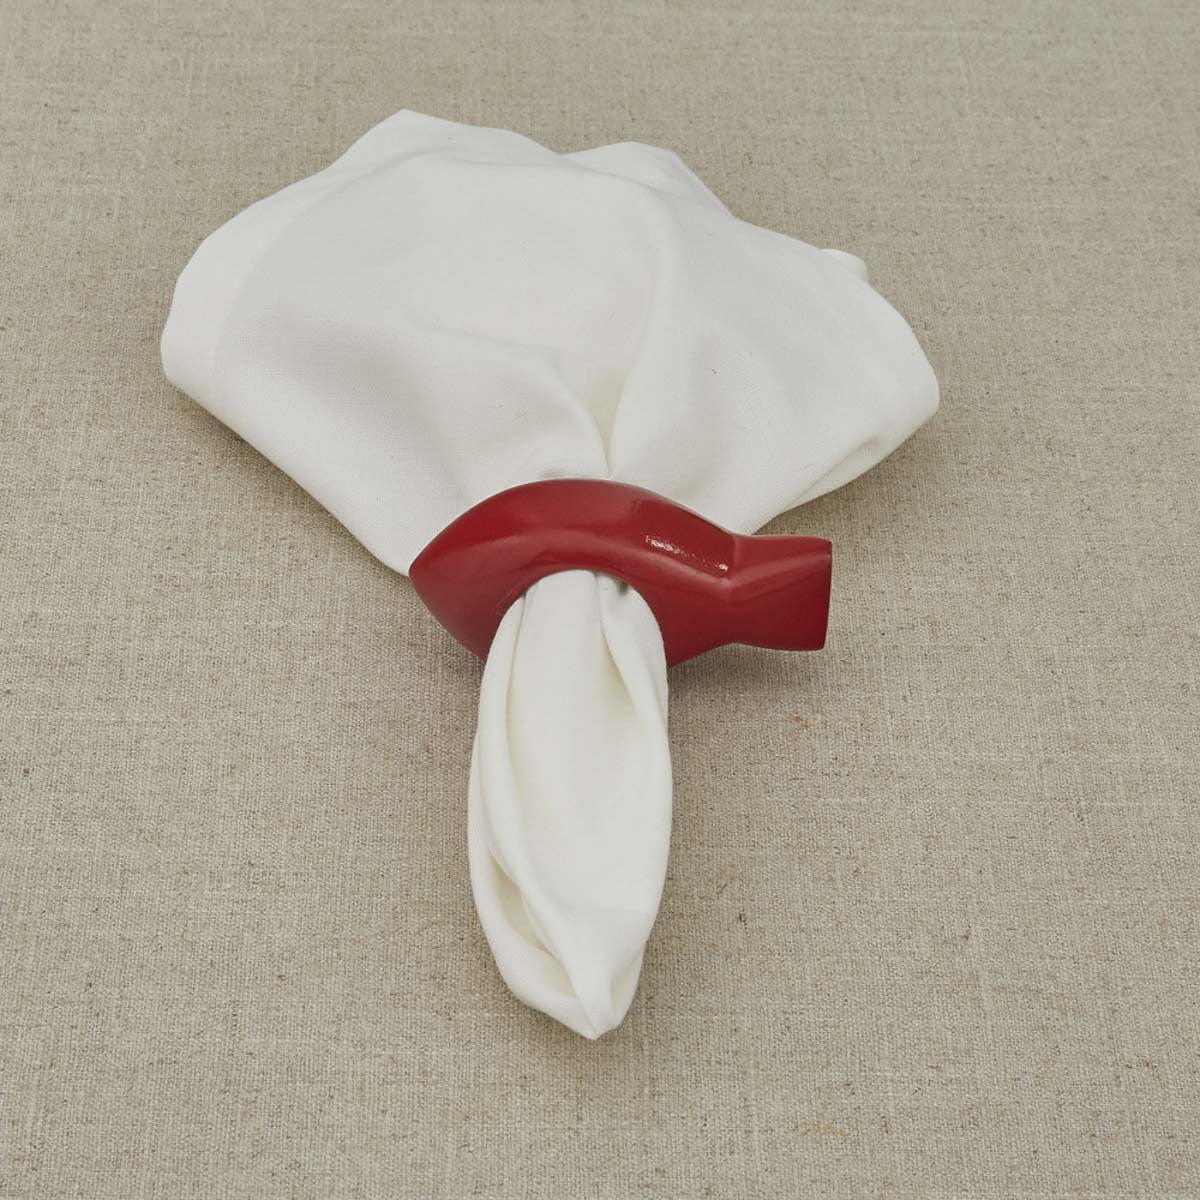 Park Fish Napkin Ring Red Wooden